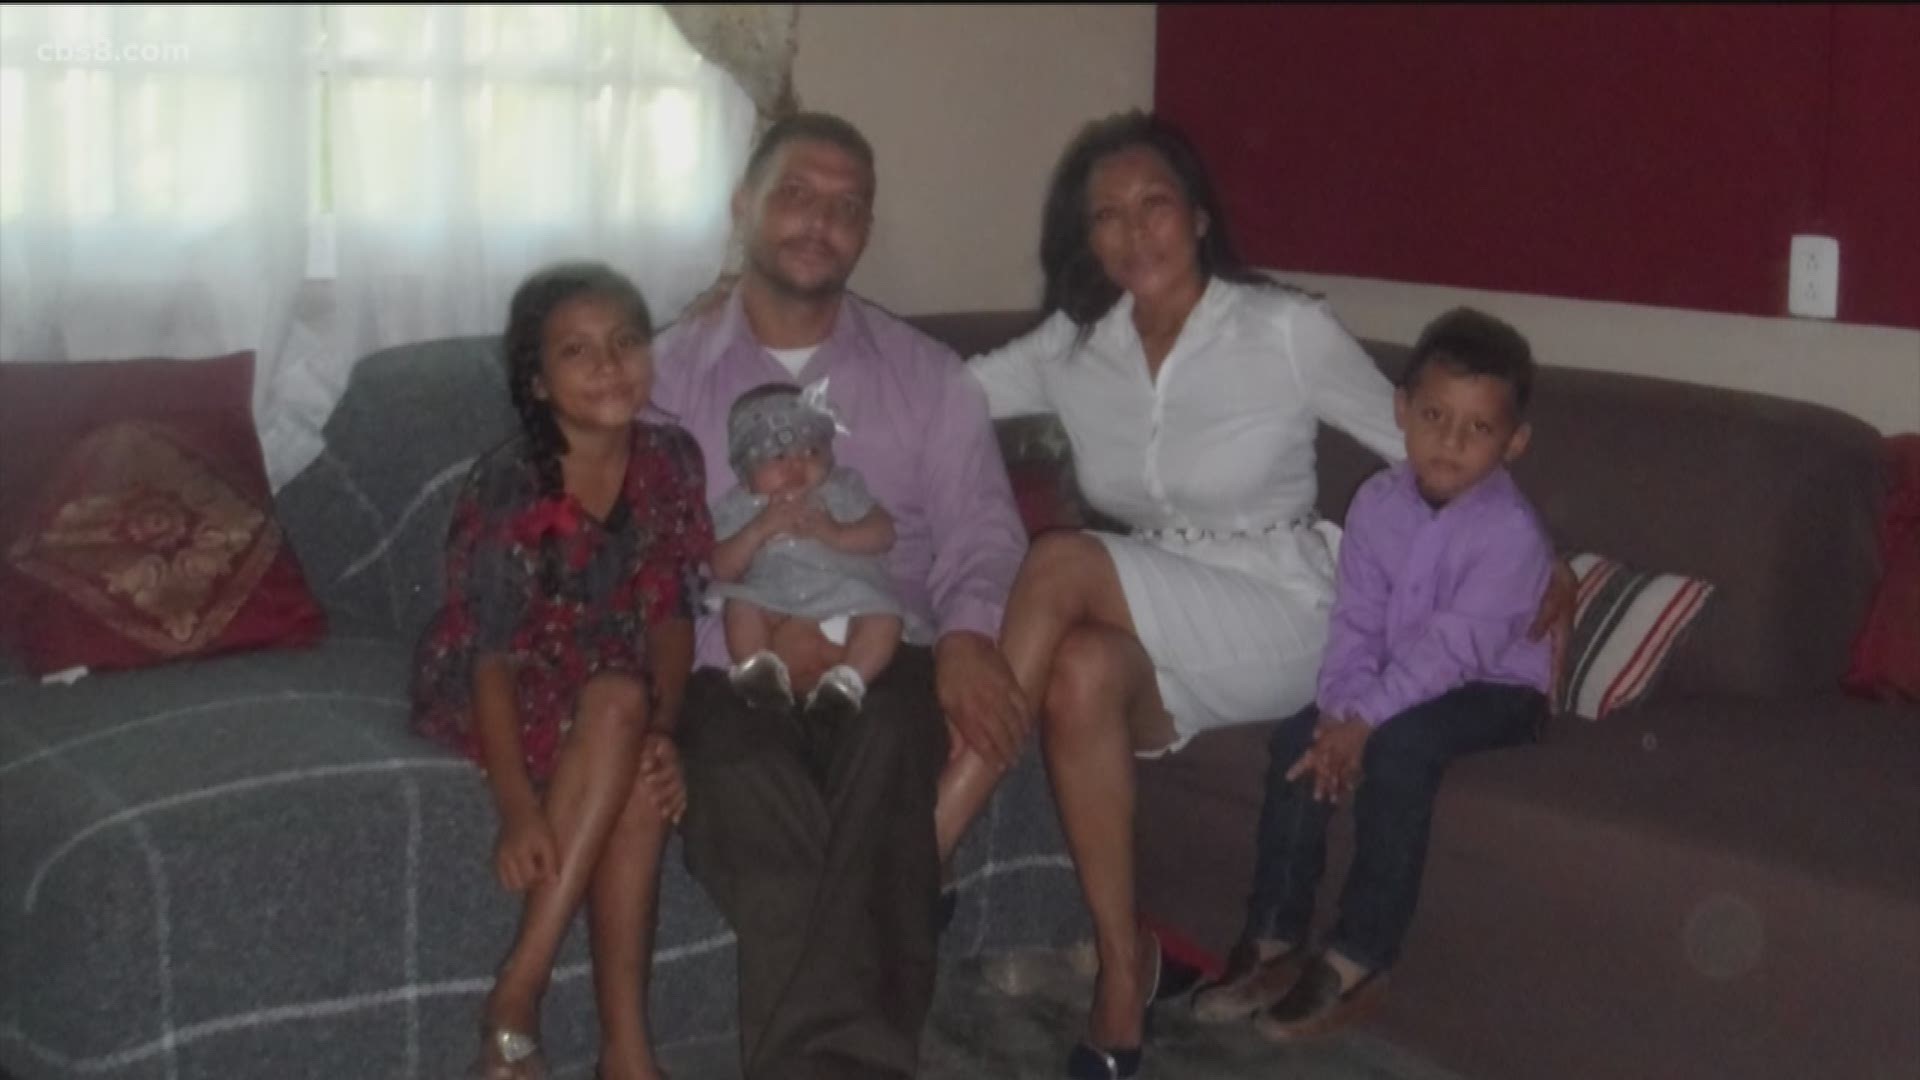 A U.S. citizen living in Tijuana with his wife and three children is one step closer to the American dream.